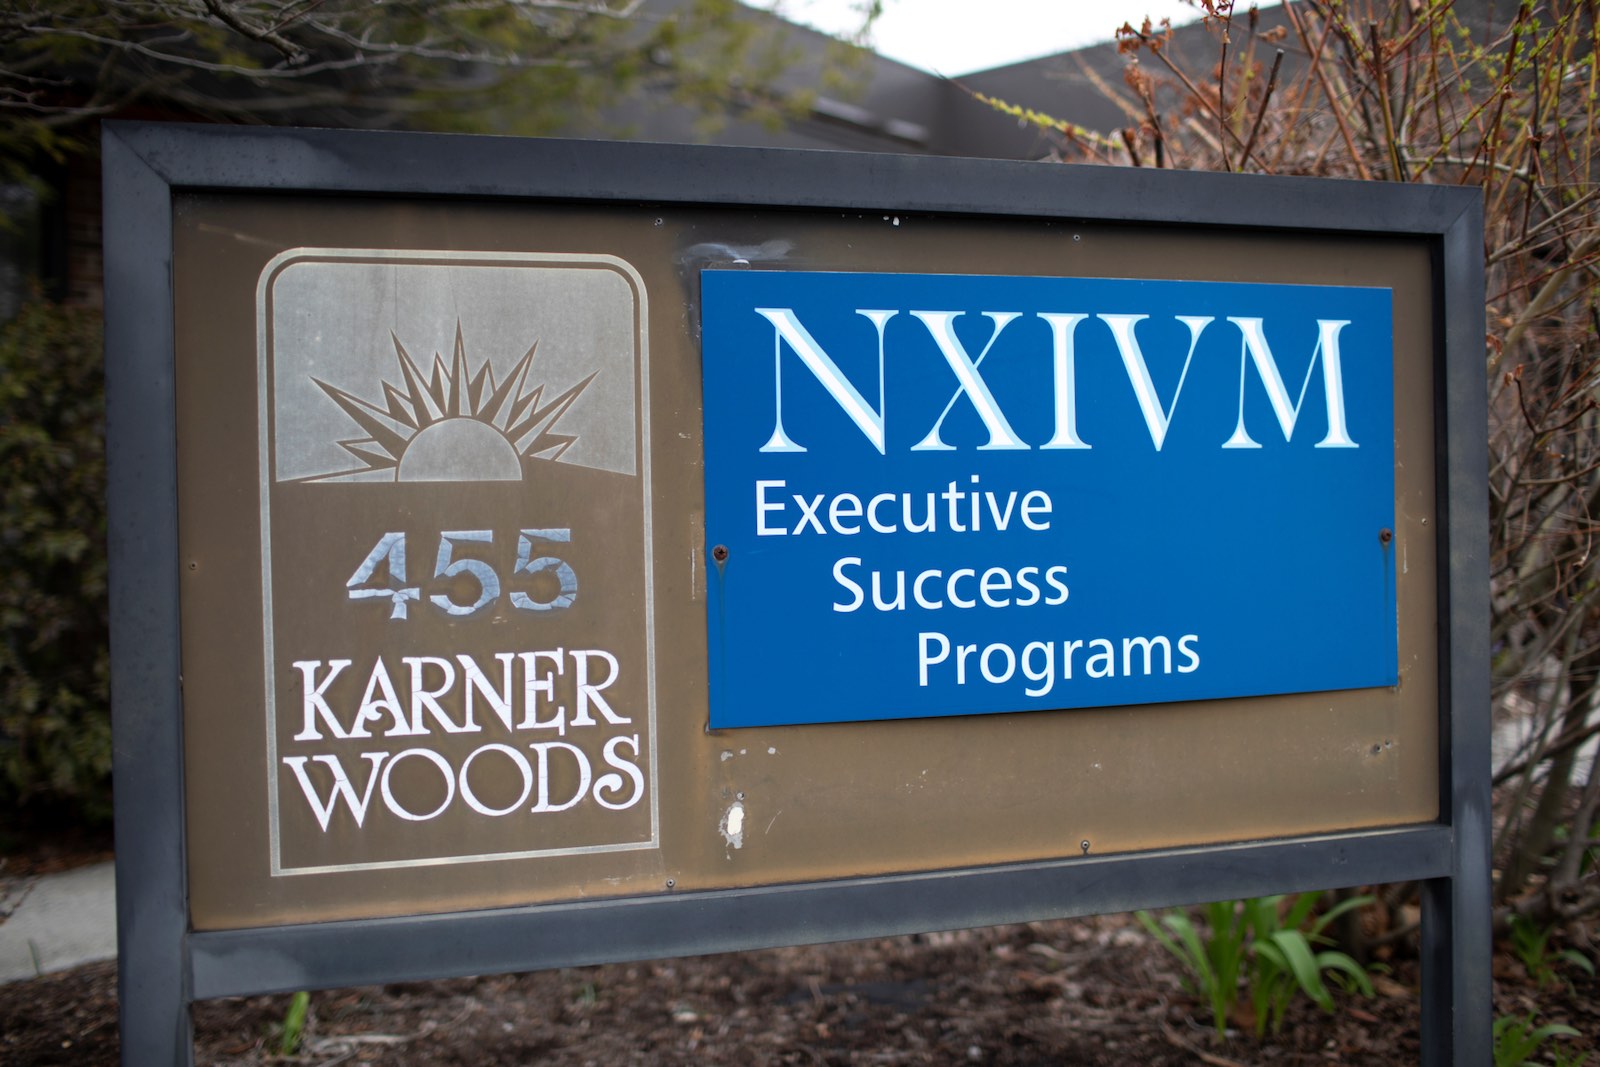 With most of the major players involved in the NXIVM brand either in jail or awaiting sentencing, is the brand still alive? If so, who's running NXIVM?